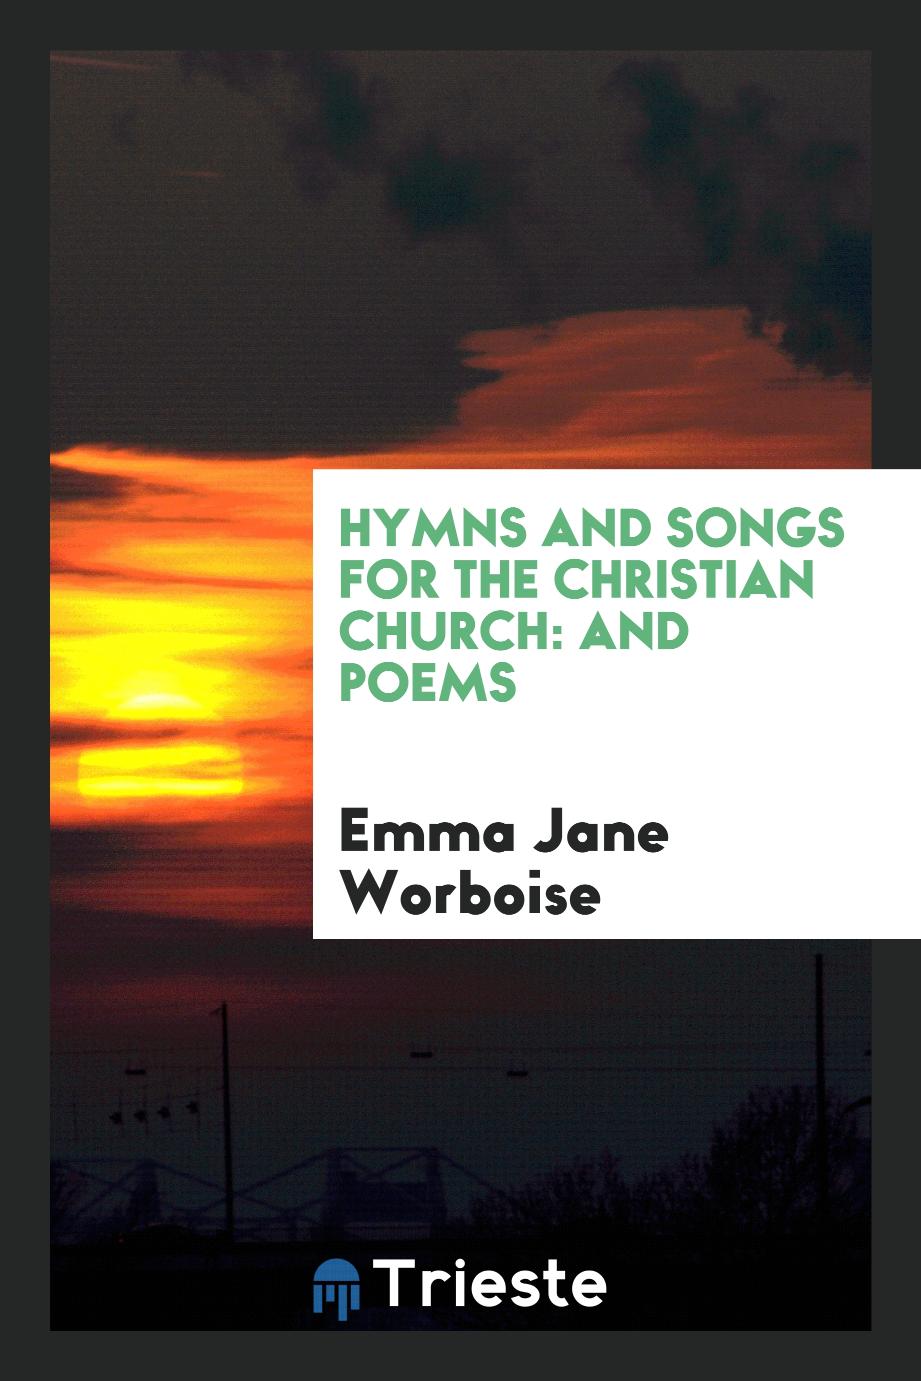 Hymns and Songs for the Christian Church: and Poems